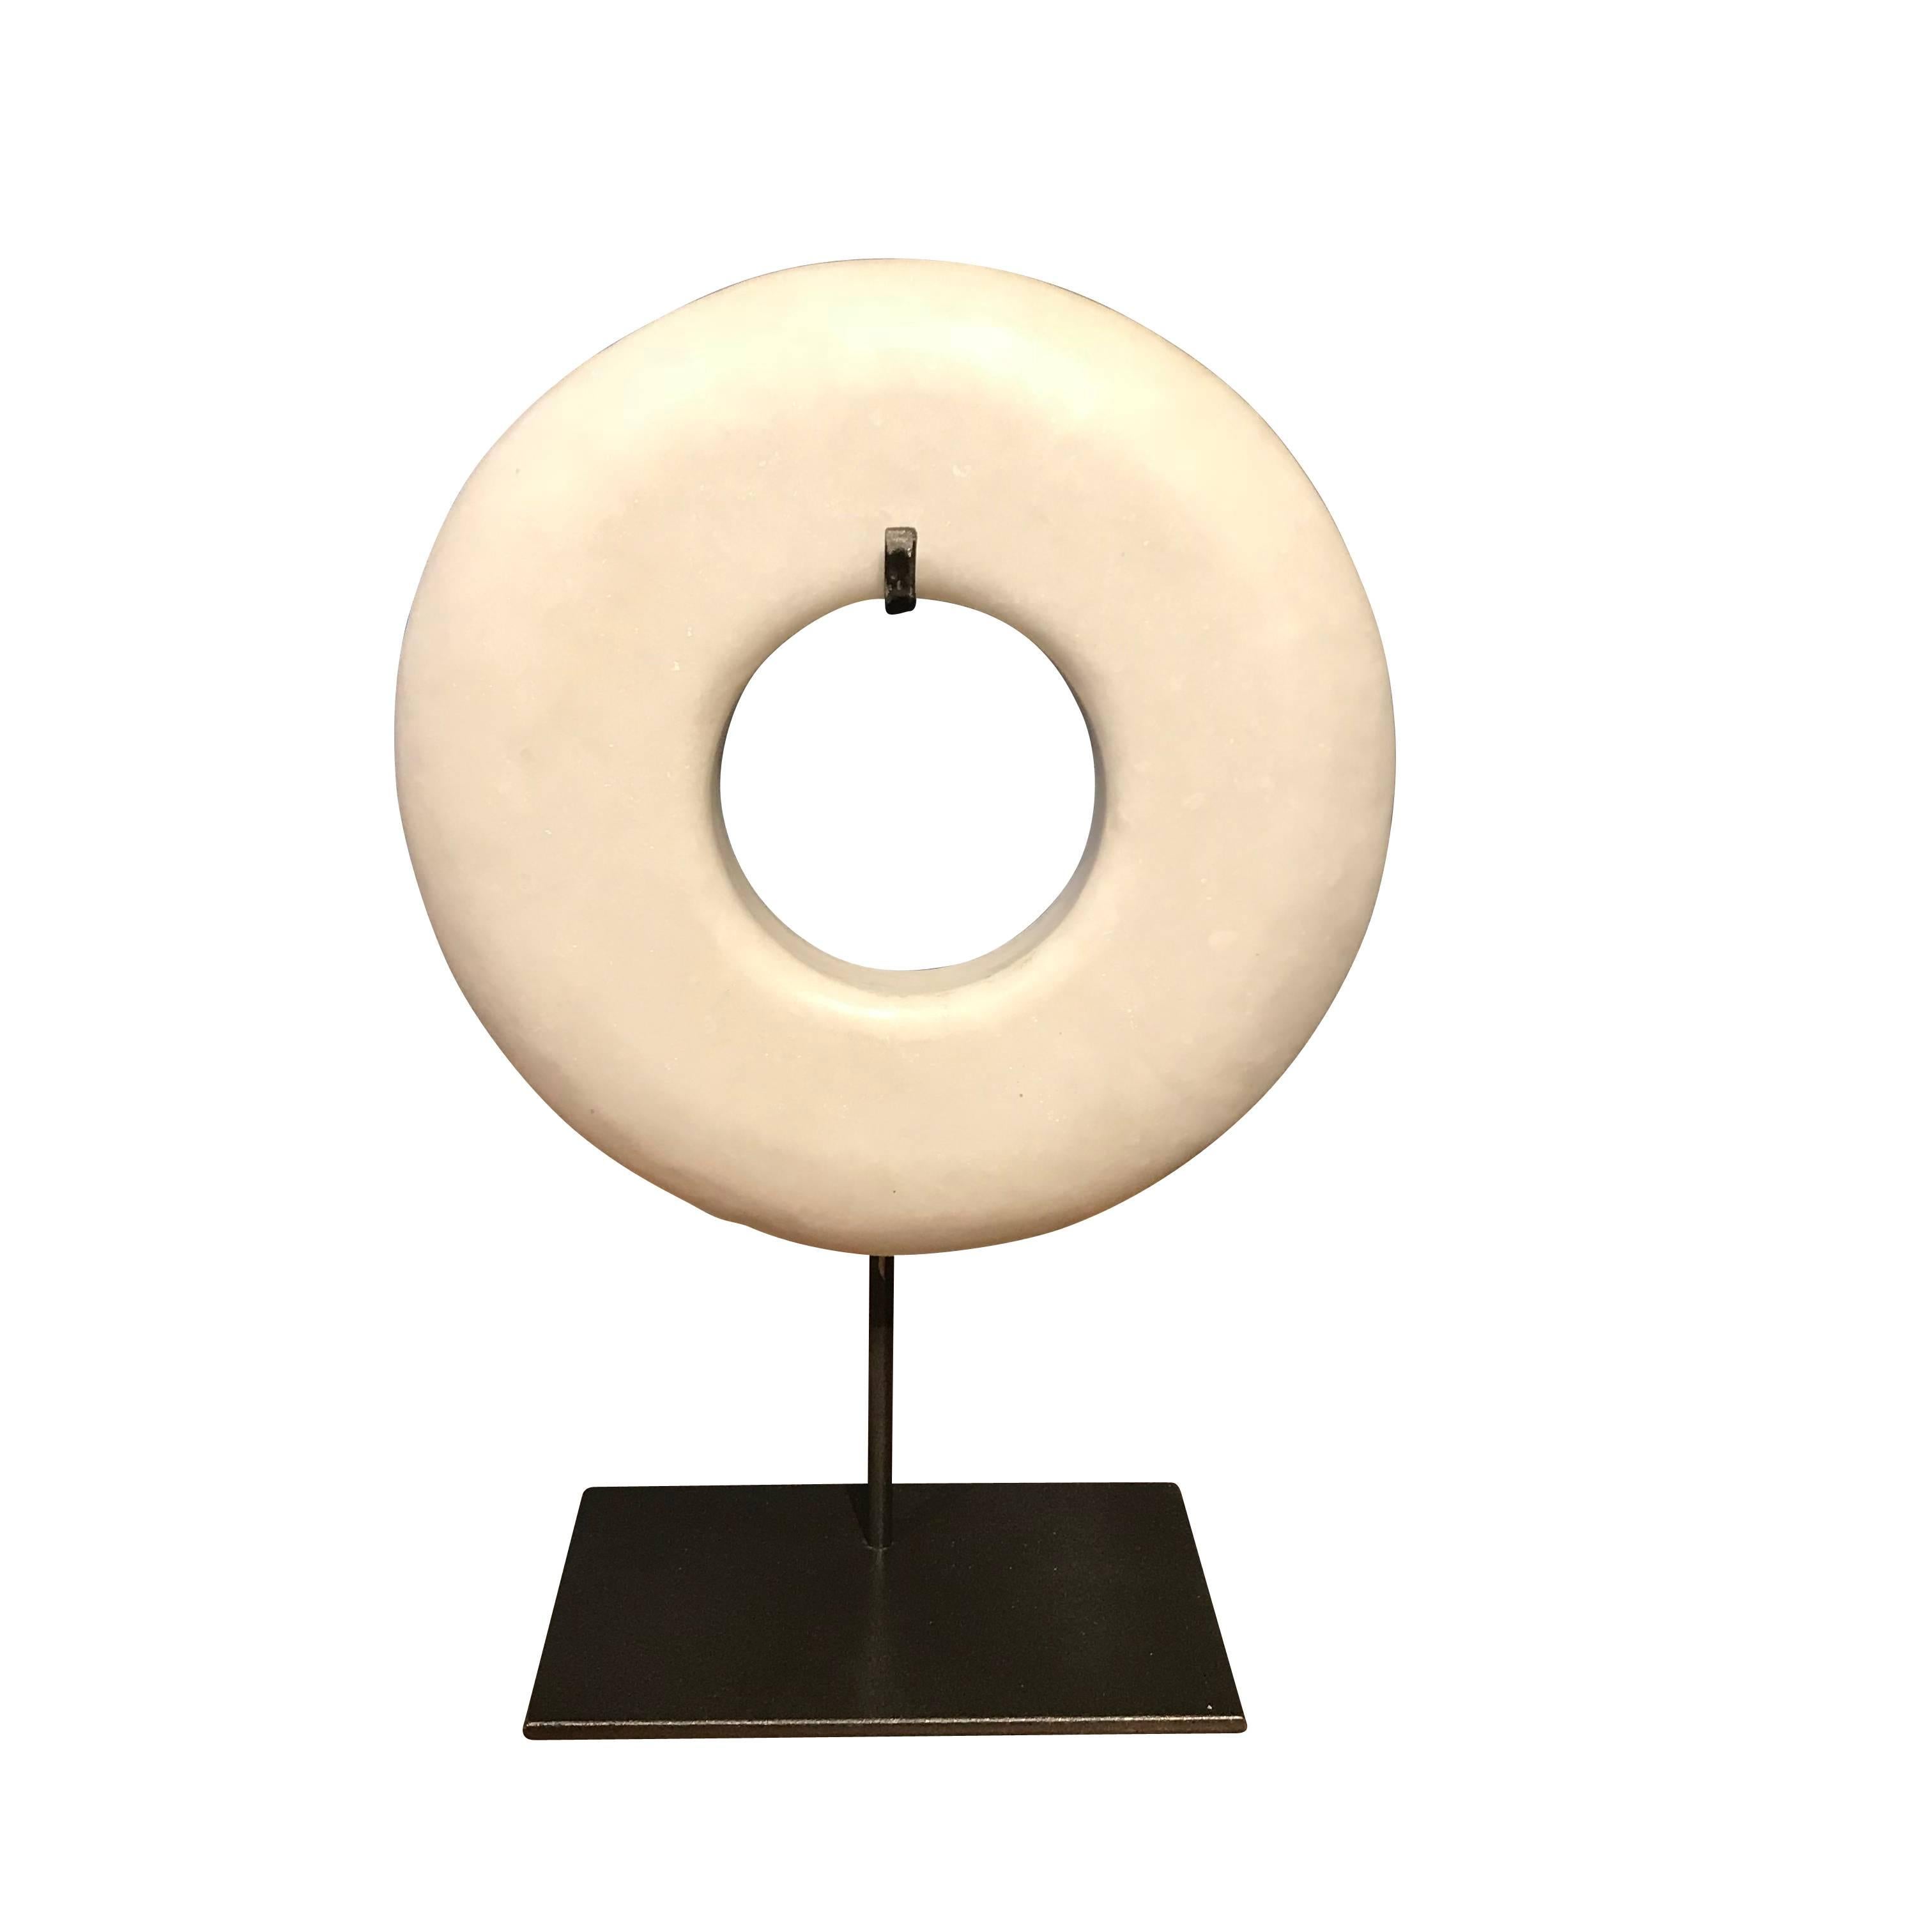 Contemporary pair of thick white stone ring sculptures on metal stands.
Stand measures 6